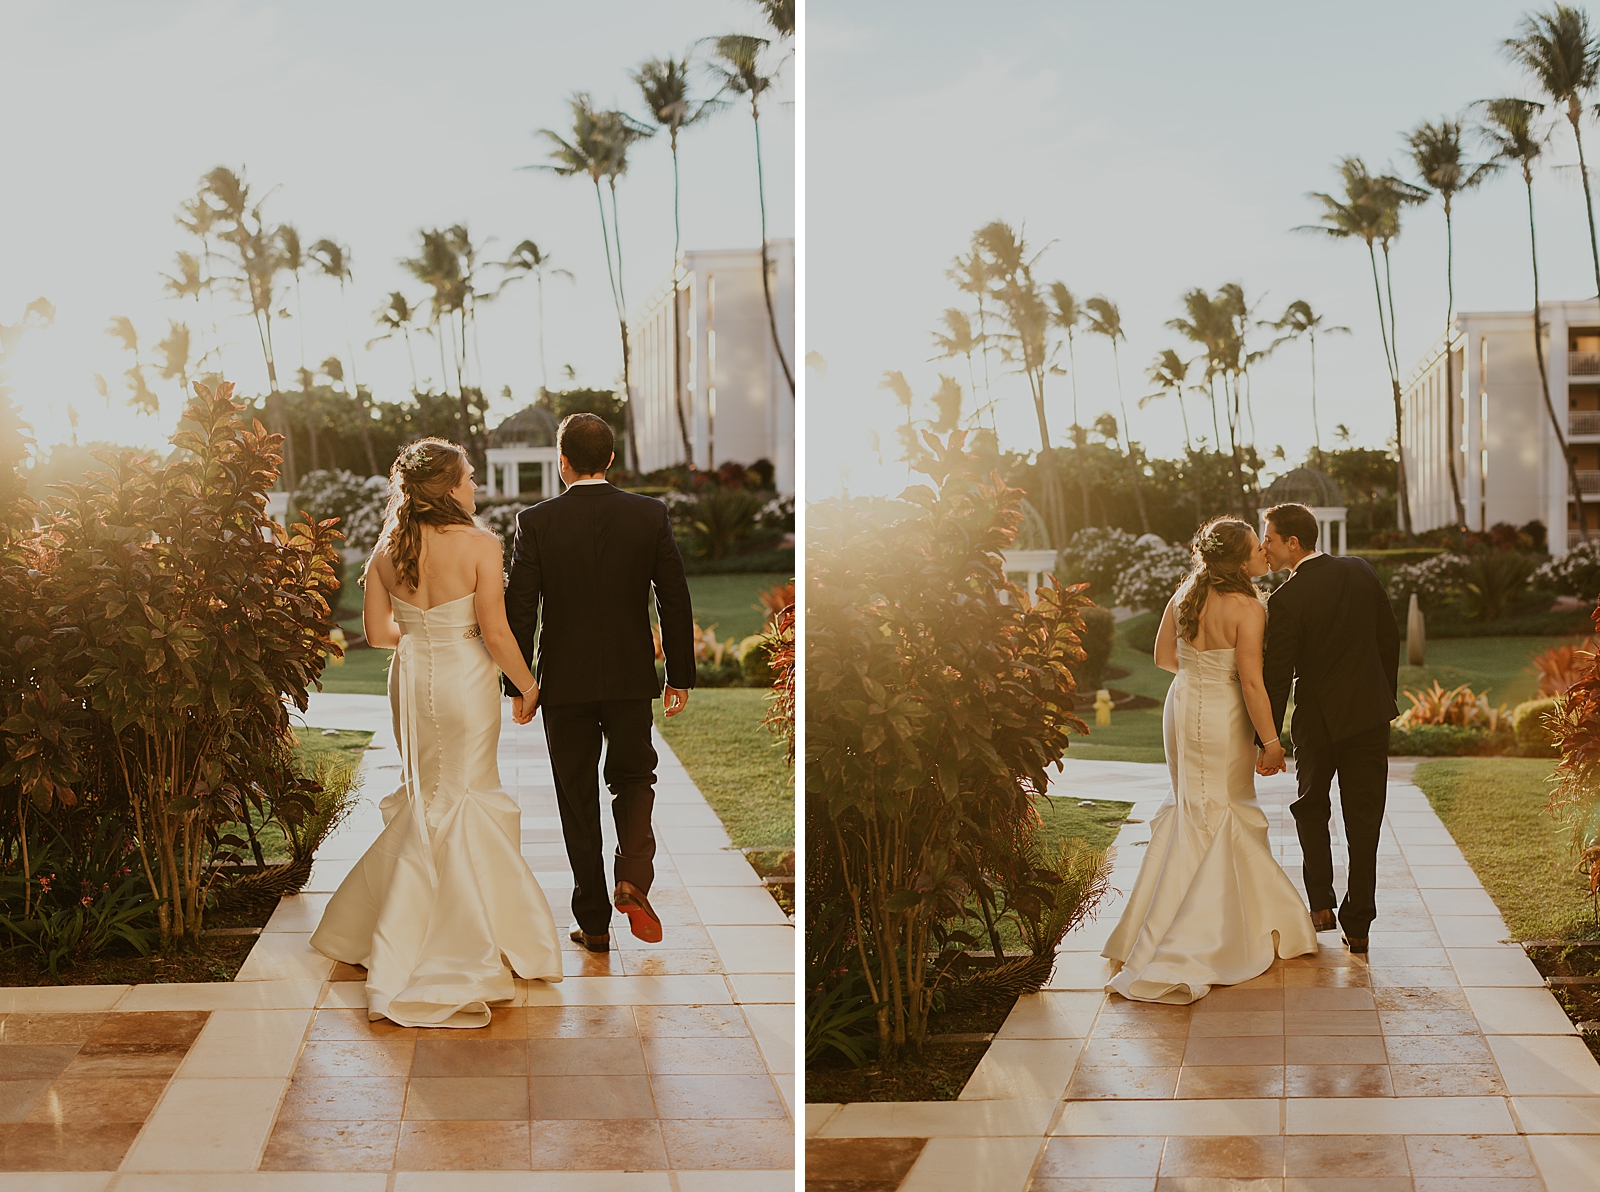 Bride and Groom holding hands with the sun setting as they walk on tile path 